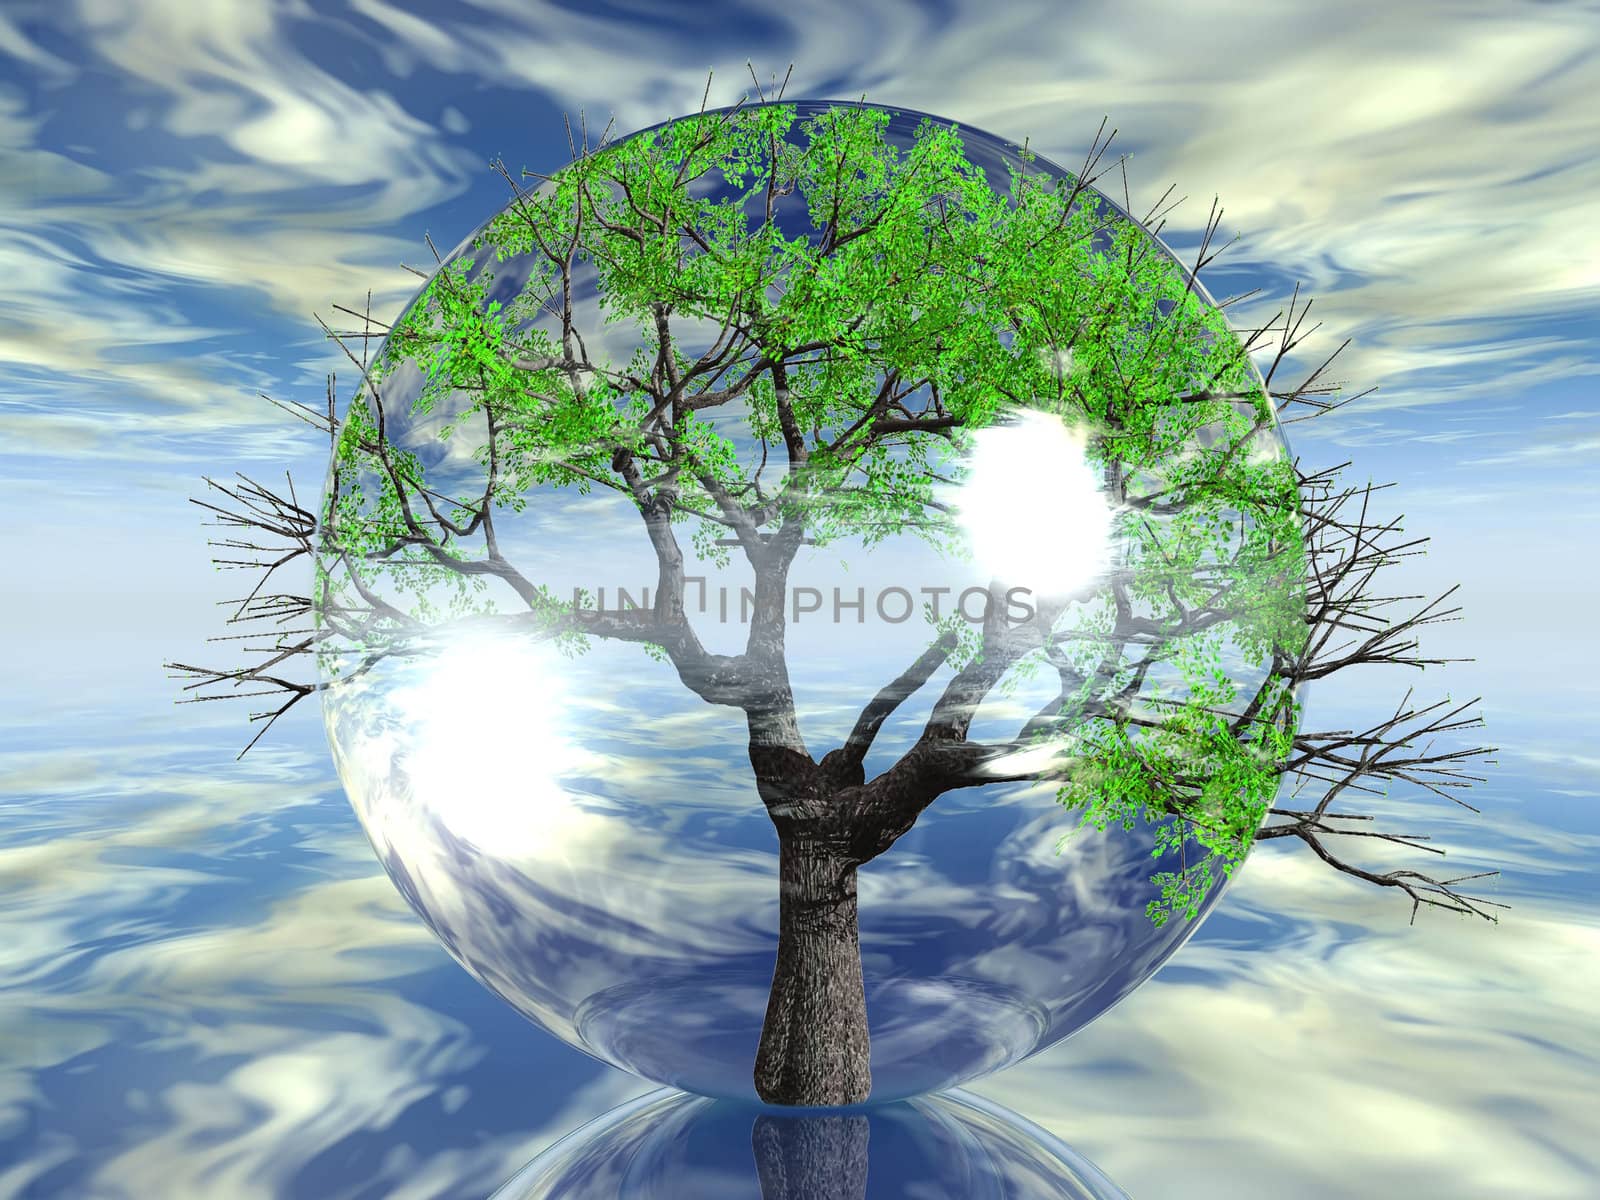 green tree in a transparent bubble